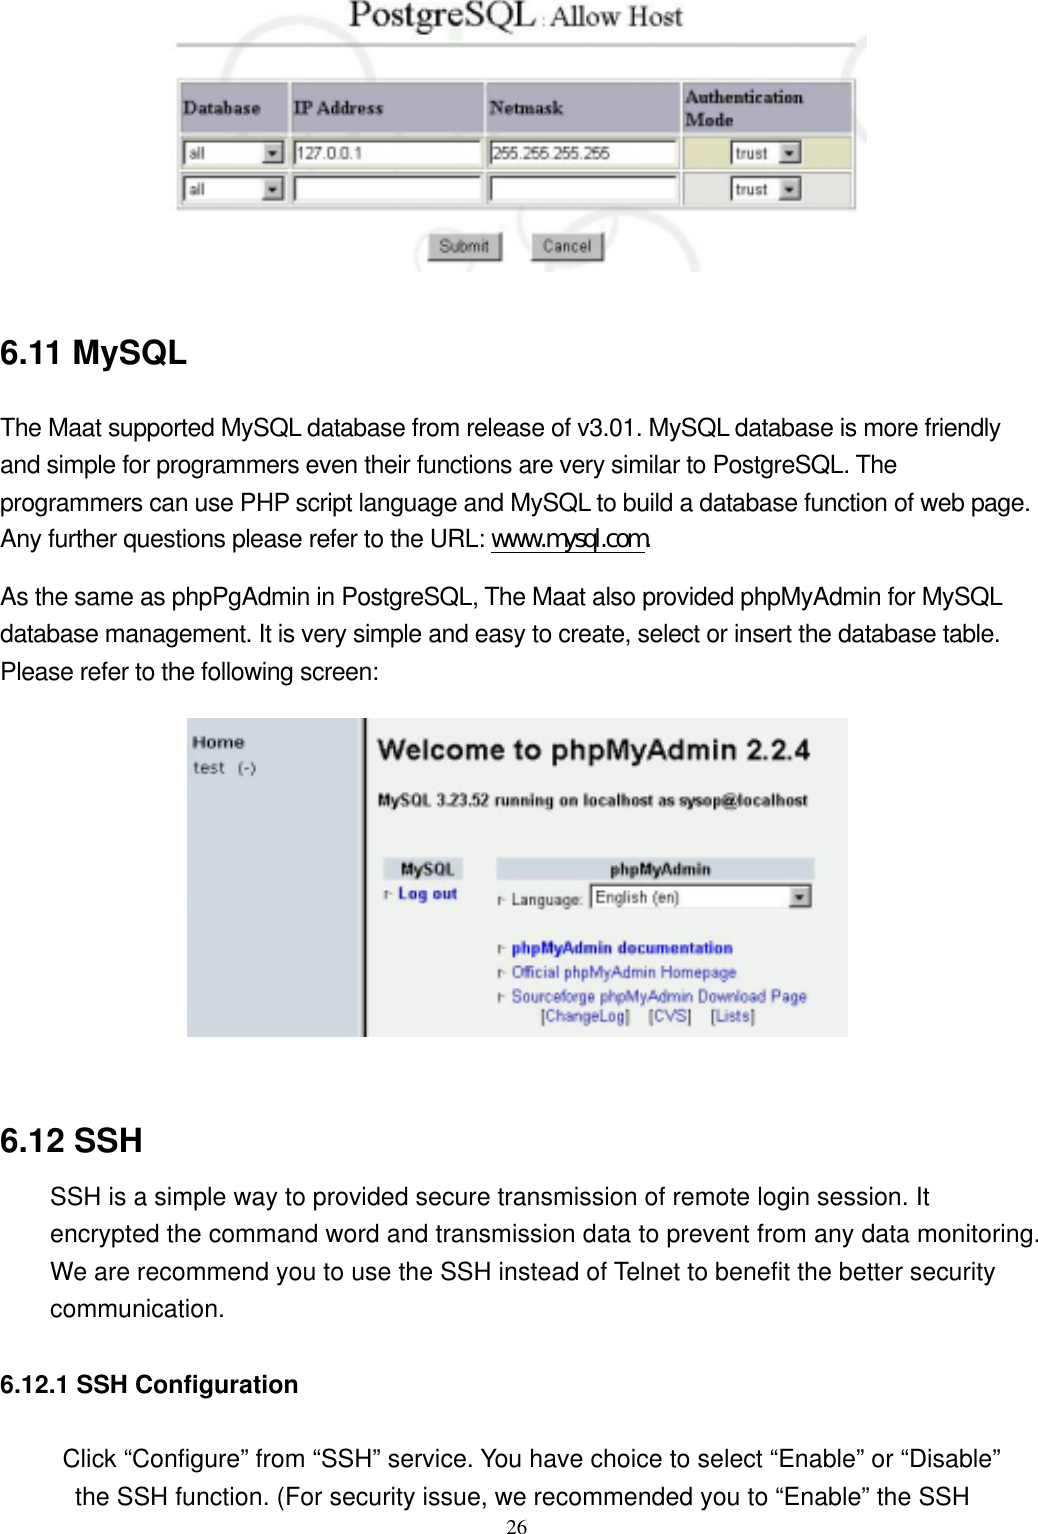  26  6.11 MySQL The Maat supported MySQL database from release of v3.01. MySQL database is more friendly and simple for programmers even their functions are very similar to PostgreSQL. The programmers can use PHP script language and MySQL to build a database function of web page. Any further questions please refer to the URL: www.mysql.com. As the same as phpPgAdmin in PostgreSQL, The Maat also provided phpMyAdmin for MySQL database management. It is very simple and easy to create, select or insert the database table. Please refer to the following screen:   6.12 SSH SSH is a simple way to provided secure transmission of remote login session. It encrypted the command word and transmission data to prevent from any data monitoring. We are recommend you to use the SSH instead of Telnet to benefit the better security communication.  6.12.1 SSH Configuration      Click “Configure” from “SSH” service. You have choice to select “Enable” or “Disable” the SSH function. (For security issue, we recommended you to “Enable” the SSH 